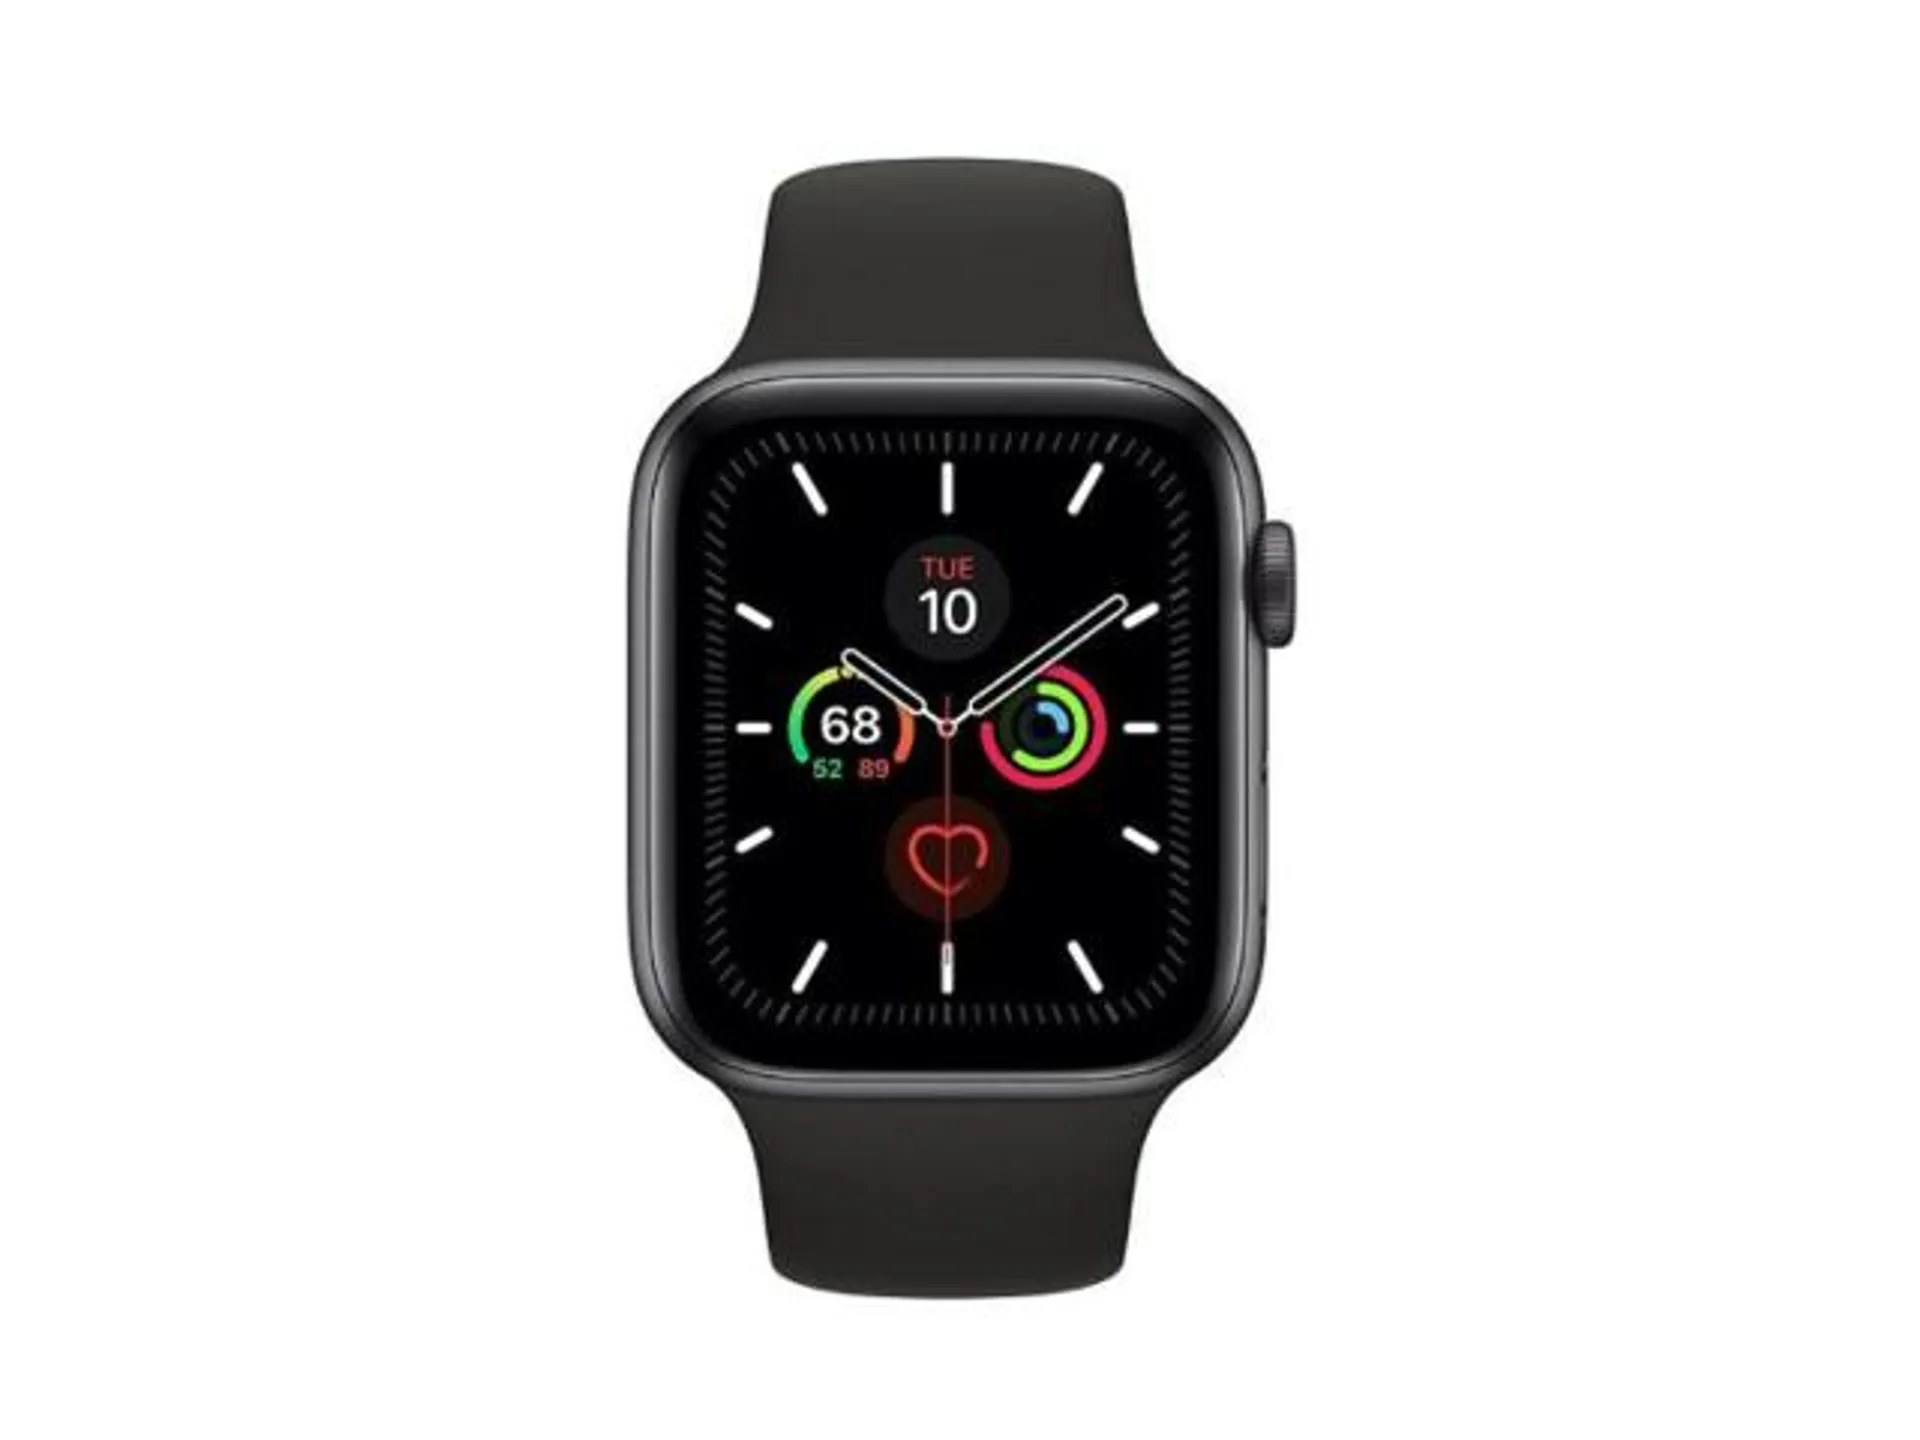 Apple Watch Series 5, 44mm, GPS + Cellular, Space Grey Aluminium Case with Black Sport Band